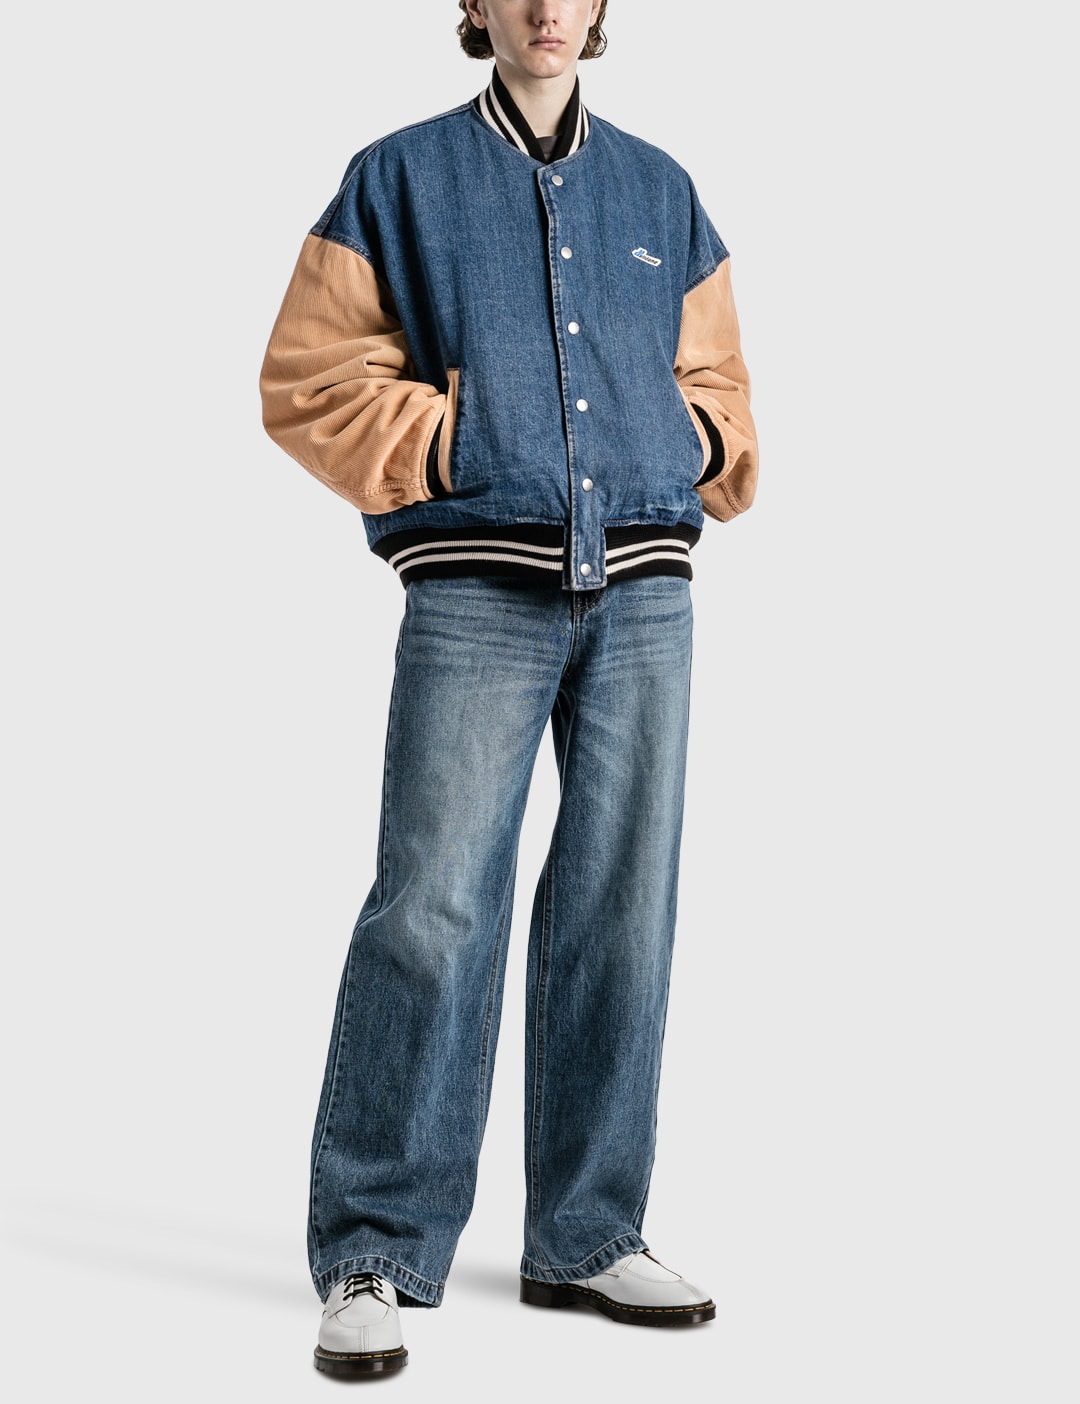 We11done - Denim Varsity Jacket | HBX - Globally Curated Fashion and ...